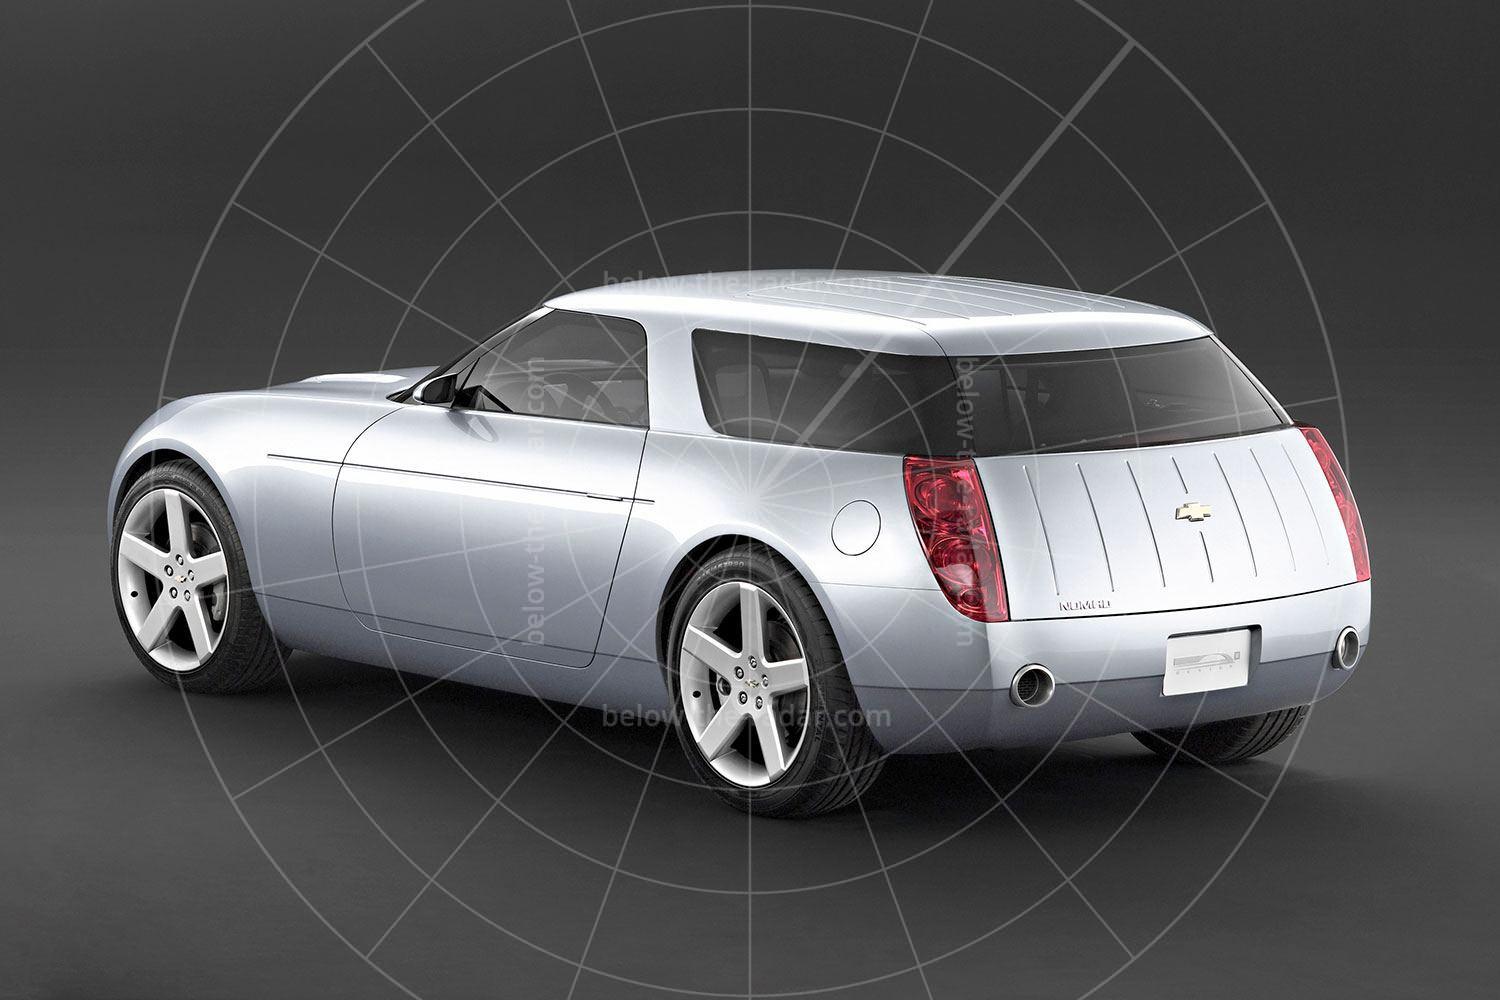 The 2004 Chevrolet Nomad concept